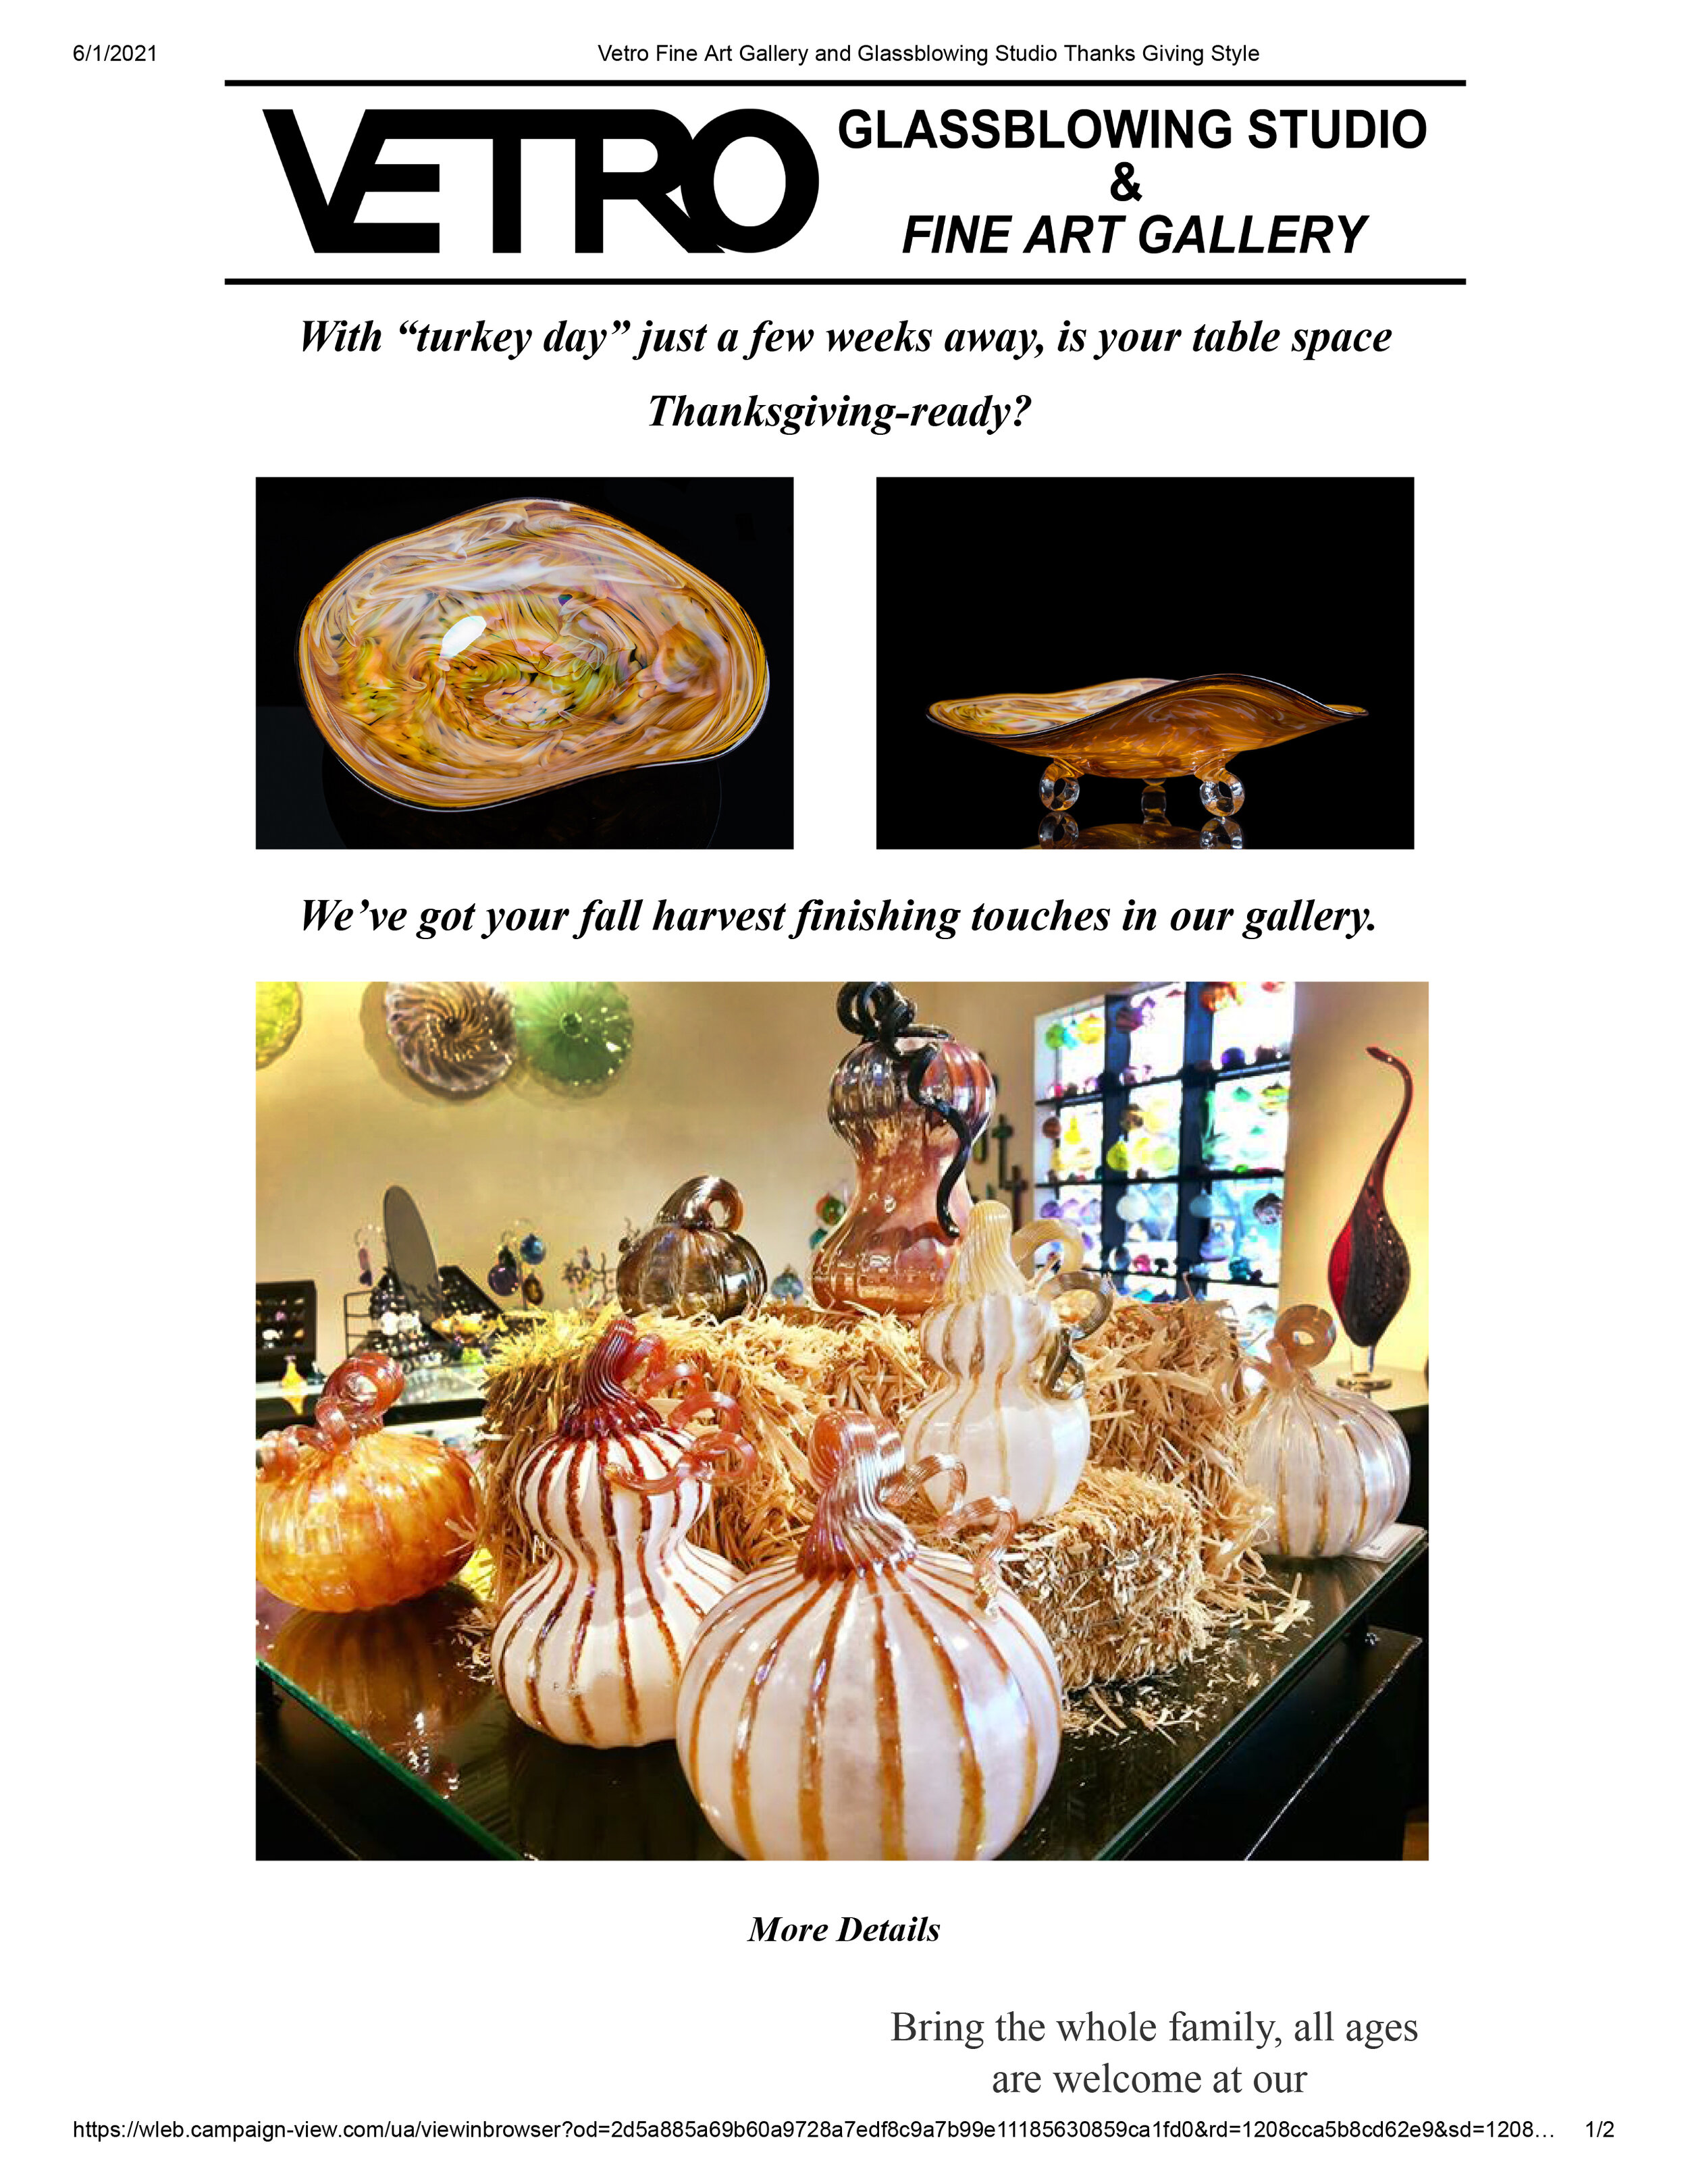 Email Campaigns -Vetro Glassblowing Studio - fall harvest finishing touches-1.jpg